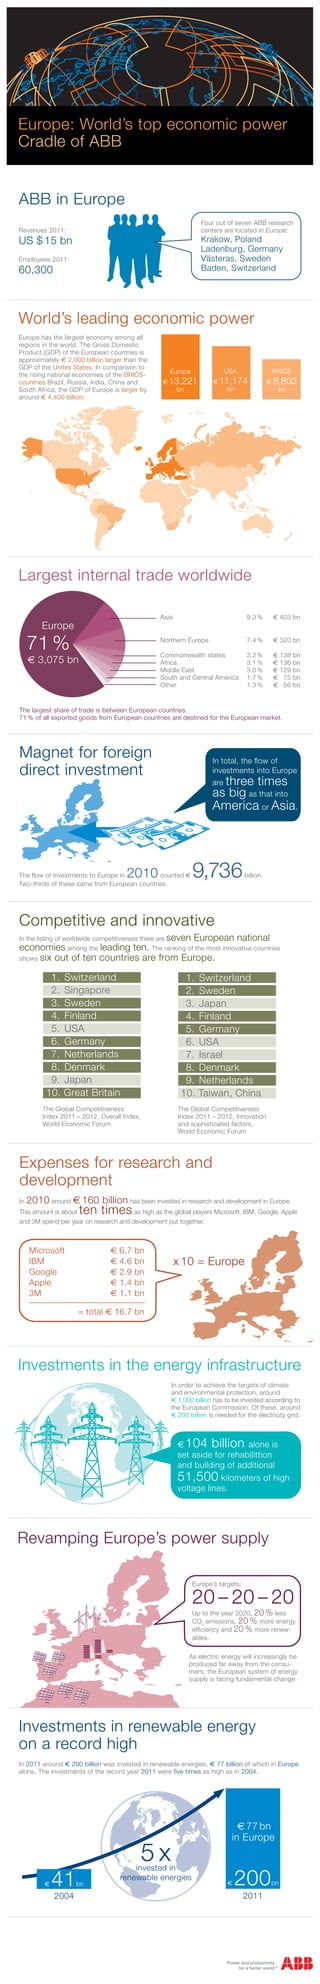 Europe: World’s top economic power
Cradle of ABB


ABB in Europe
                                                                 Four out of seven ABB research
Revenues 2011:                                                   centers are located in Europe:
US $ 15 bn                                                       Krakow, Poland
                                                                 Ladenburg, Germany
Employees 2011:                                                  Västeras, Sweden
60,300                                                           Baden, Switzerland




World’s leading economic power
Europe has the largest economy among all
regions in the world. The Gross Domestic
Product (GDP) of the European countries is
approximately E 2,000 billion larger than the
GDP of the Unites States. In comparison to
                                                     Europe                USA                   BRICS
the rising national economies of the BRICS-
countries Brazil, Russia, India, China and        E 13,221           E 11,174                E   8,803
South Africa, the GDP of Europe is larger by         bn                 bn                        bn
around E 4,400 billion.




Largest internal trade worldwide

                                                 Asia	                            9.3 %	         E 403 bn 
         Europe	

     71 %                                        Northern Europe	

                                                 Commonwealth states	
                                                                                  7.4 %	

                                                                             3.2 %	
                                                                                                 E 320 bn

                                                                                                 E 138    bn
     E 3,075 bn                                  Africa	                     3.1 %	              E 136    bn 
                                                 Middle East	                3.0 %	              E 129    bn 
                                                 South and Central America 	 1.7 %	              E   75   bn 
                                                 Other	                      1.3 %	              E   56   bn 


The largest share of trade is between European countries.
71 % of all exported goods from European countries are destined for the European market.




Magnet for foreign                                                   In total, the flow of
direct investment                                                    investments into Europe
                                                                       three times
                                                                     are
                                                                     as big as that into
                                                                     America or Asia.




The flow of investments to Europe in  2010    counted E
Two-thirds of these came from European countries.
                                                              9,736               billion.




Competitive and innovative
In the listing of worldwide competitiveness there are seven European national
economies among the leading ten. The ranking of the most innovative countries
shows    six out of ten countries are from Europe.

           	 1.	Switzerland                              	 1. 	Switzerland
           	 2.	Singapore                                	 2. 	Sweden
           	 3. 	Sweden                                  	 3. 	Japan
           	 4. 	Finland                                 	 4. 	Finland
           	 5. 	USA                                     	 5. 	Germany
           	 6. 	Germany                                 	 6. 	USA
           	 7. 	Netherlands                             	 7. 	Israel
           	 8. 	Denmark                                 	 8. 	Denmark
           	 9. 	Japan                                   	 9. 	Netherlands
           10. Great Britain                             10. Taiwan, China
          The Global Competitiveness                     The Global Competitiveness
          Index 2011 – 2012, Overall Index,              Index 2011 – 2012, Innovation
          World Economic Forum                           and sophisticated factors,
                                                         World Economic Forum




Expenses for research and
development
In   2010 around E 160 billion has been invested in research and development in Europe.
This amount is about    ten times      as high as the global players Microsoft, IBM, Google, Apple
and 3M spend per year on research and development put together.



     Microsoft	     	           E 6.7   bn
     IBM	           	           E 4.6   bn            x 10 = Europe
     Google	        	           E 2.9   bn
     Apple	         	           E 1.4   bn
     3M	            	           E 1.1   bn

                        = total E 16.7 bn




Investments in the energy infrastructure
                                                     In order to achieve the targets of climate
                                                     and environmental protection, around
                                                     E 1,000 billion has to be invested according to
                                                     the European Commission. Of these, around
                                                     E 200 billion is needed for the electricity grid.



                                                         E 104 billion alone is
                                                         set aside for rehabilittion
                                                         and building of additional
                                                         51,500 kilometers of high
                                                         voltage lines.




Revamping Europe’s power supply

                                                              Europe’s targets:

                                                              20 – 20 – 20
                                                              Up to the year 2020, 20 % less
                                                              CO2 emissions, 20 % more energy
                                                              efficiency and 20 % more renew-
                                                              ables.

                                                            As electric energy will increasingly be
                                                            produced far away from the consu-
                                                            mers, the European system of energy
                                                            supply is facing fundamental change.




Investments in renewable energy
on a record high
In 2011 around E 200 billion was invested in renewable energies, E 77 billion of which in Europe
alone. The investments of the record year 2011 were five times as high as in 2004.




                                                                              E 77 bn
                                                                            in Europe

                                              5 x
                                        invested in
          E   41        bn
                                    renewable energies
                                                                           E   200               bn

              2004                                                                2011
 